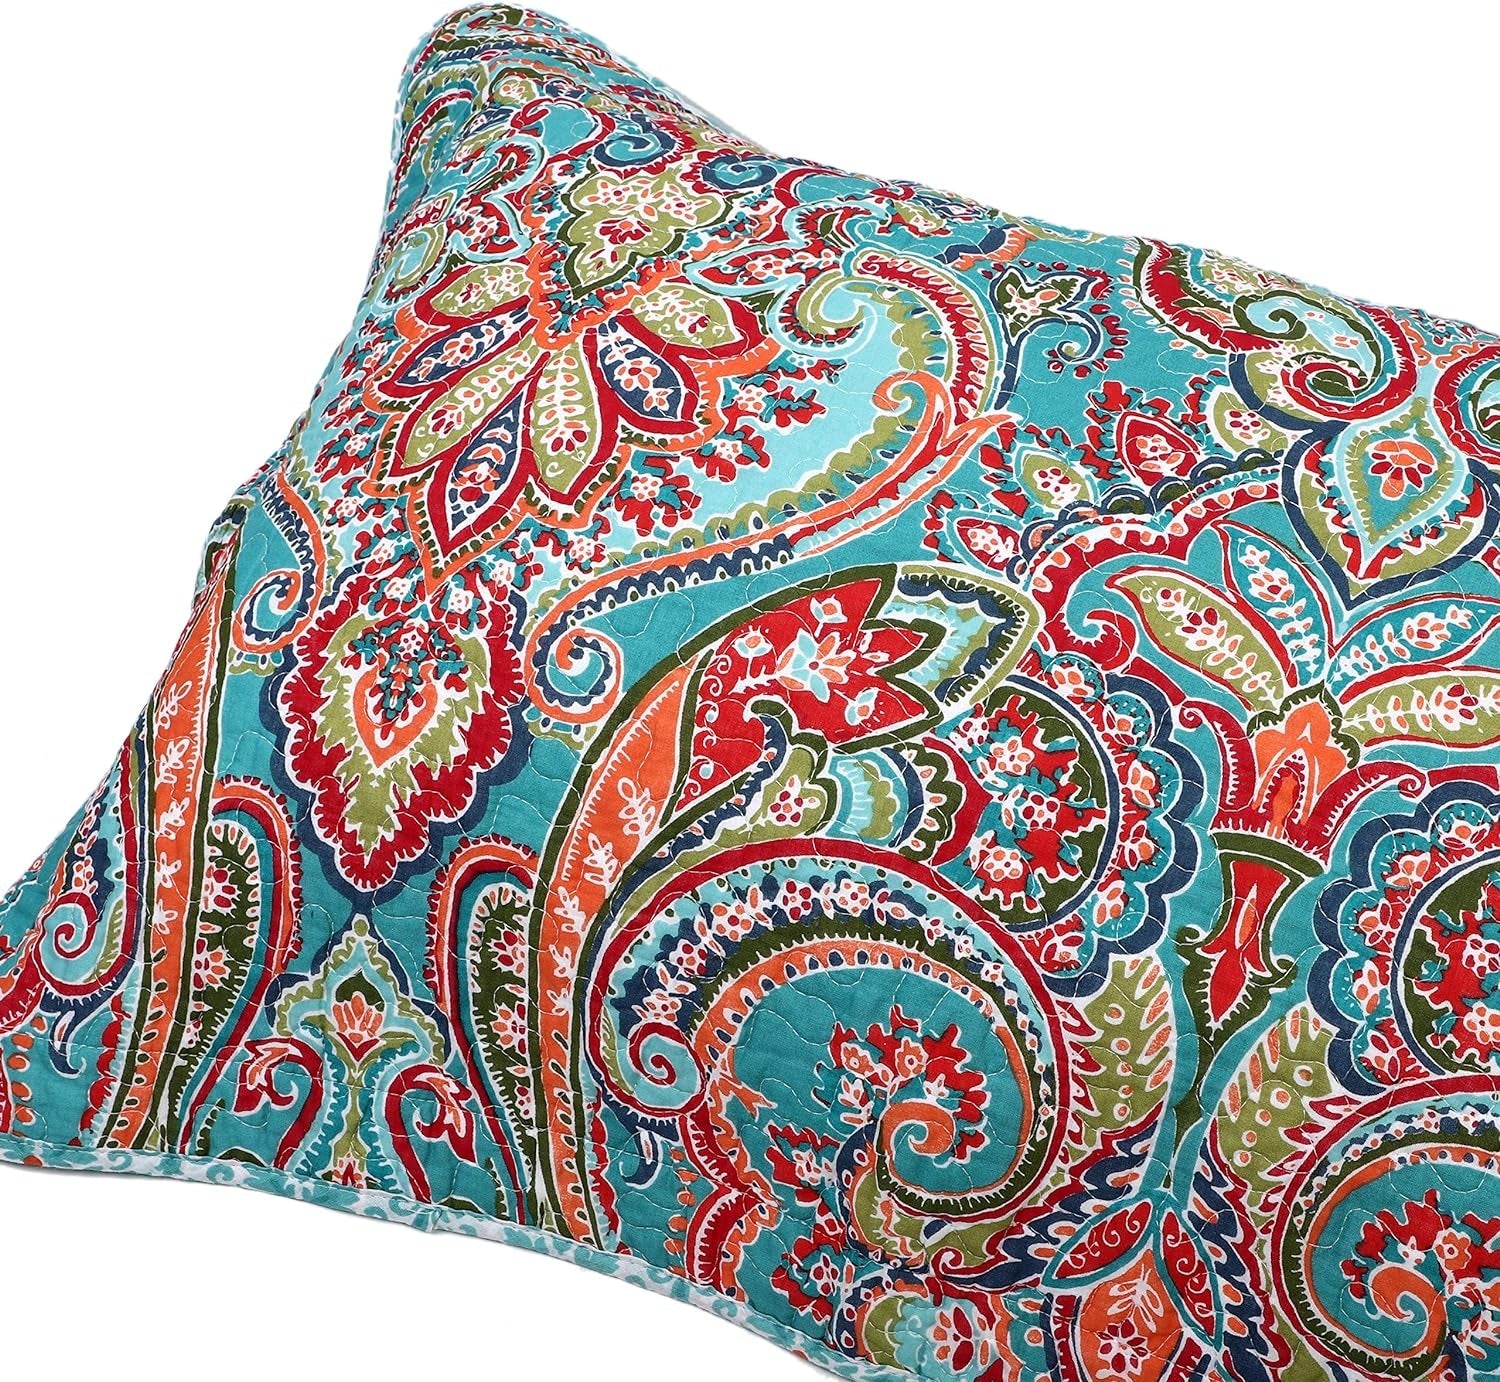 100% Cotton Quilted Pillow Shams Set of 2 Standard Size Boho Pillow Cases Bohemian Pillow Covers (Red)